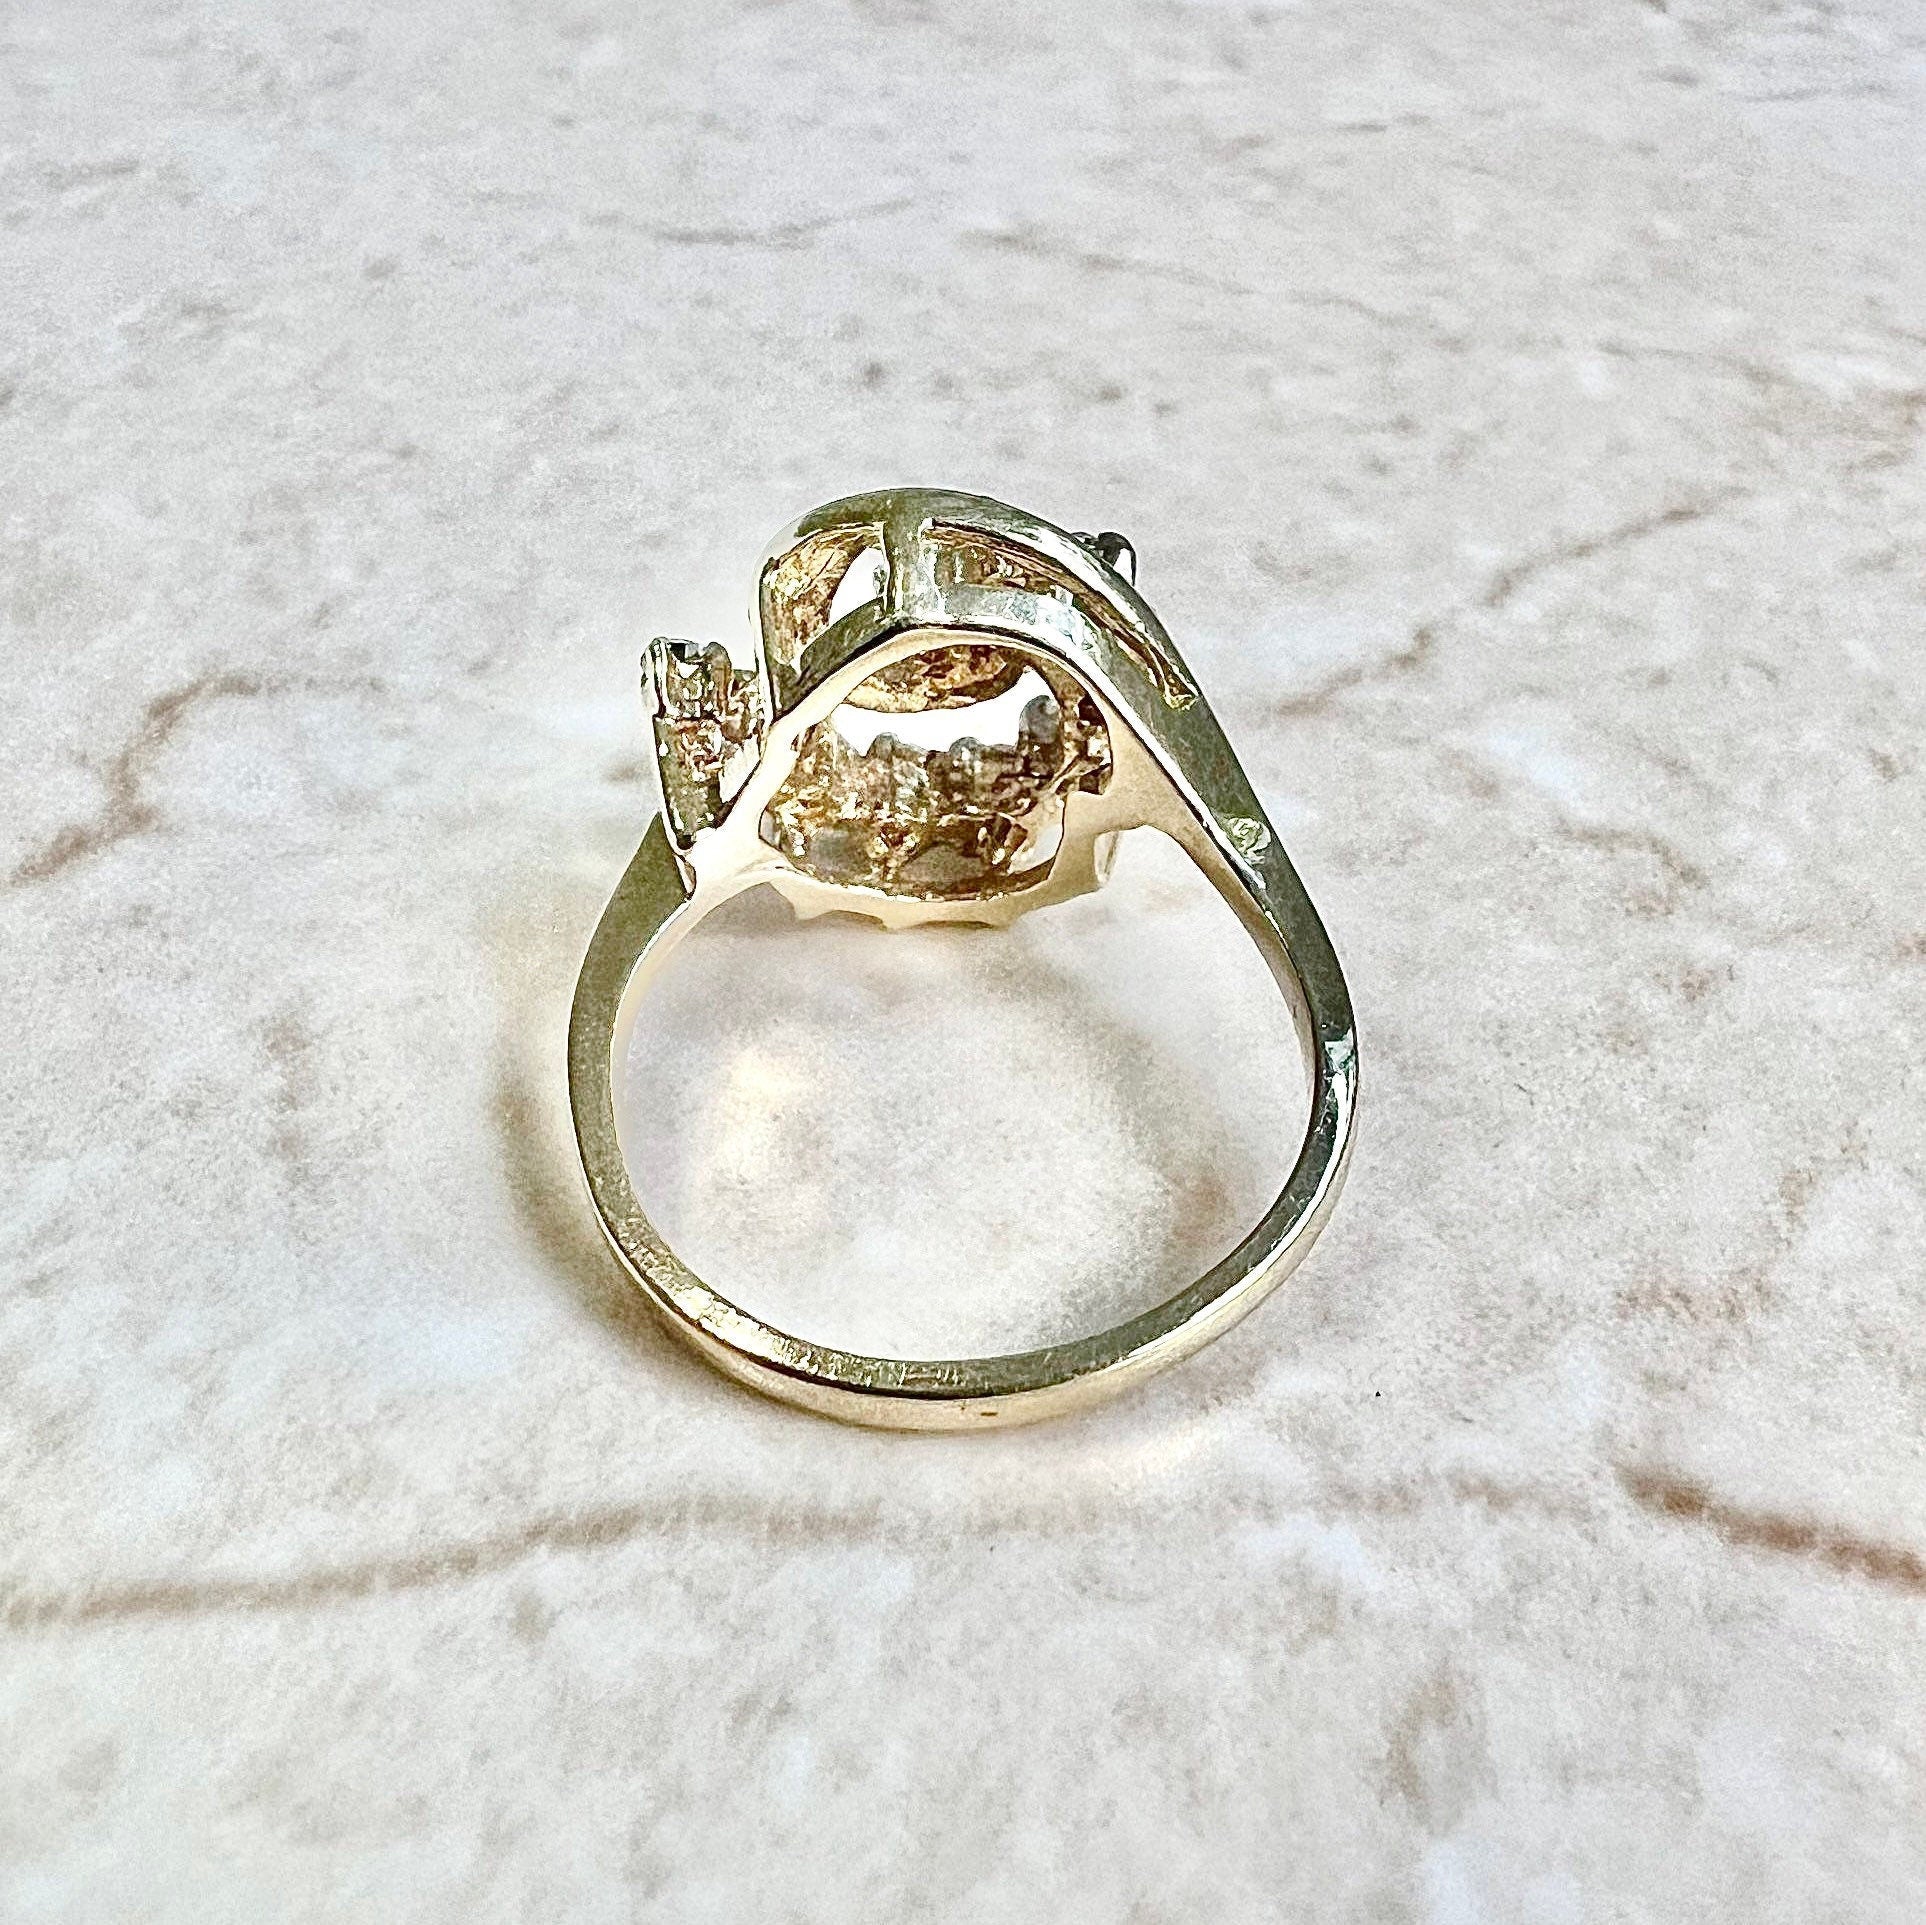 Vintage 14K Diamond Cocktail Ring - Yellow Gold Diamond Ring - Swirl Ring - Swirl Diamond Ring - Statement Ring - Best Gifts For Her